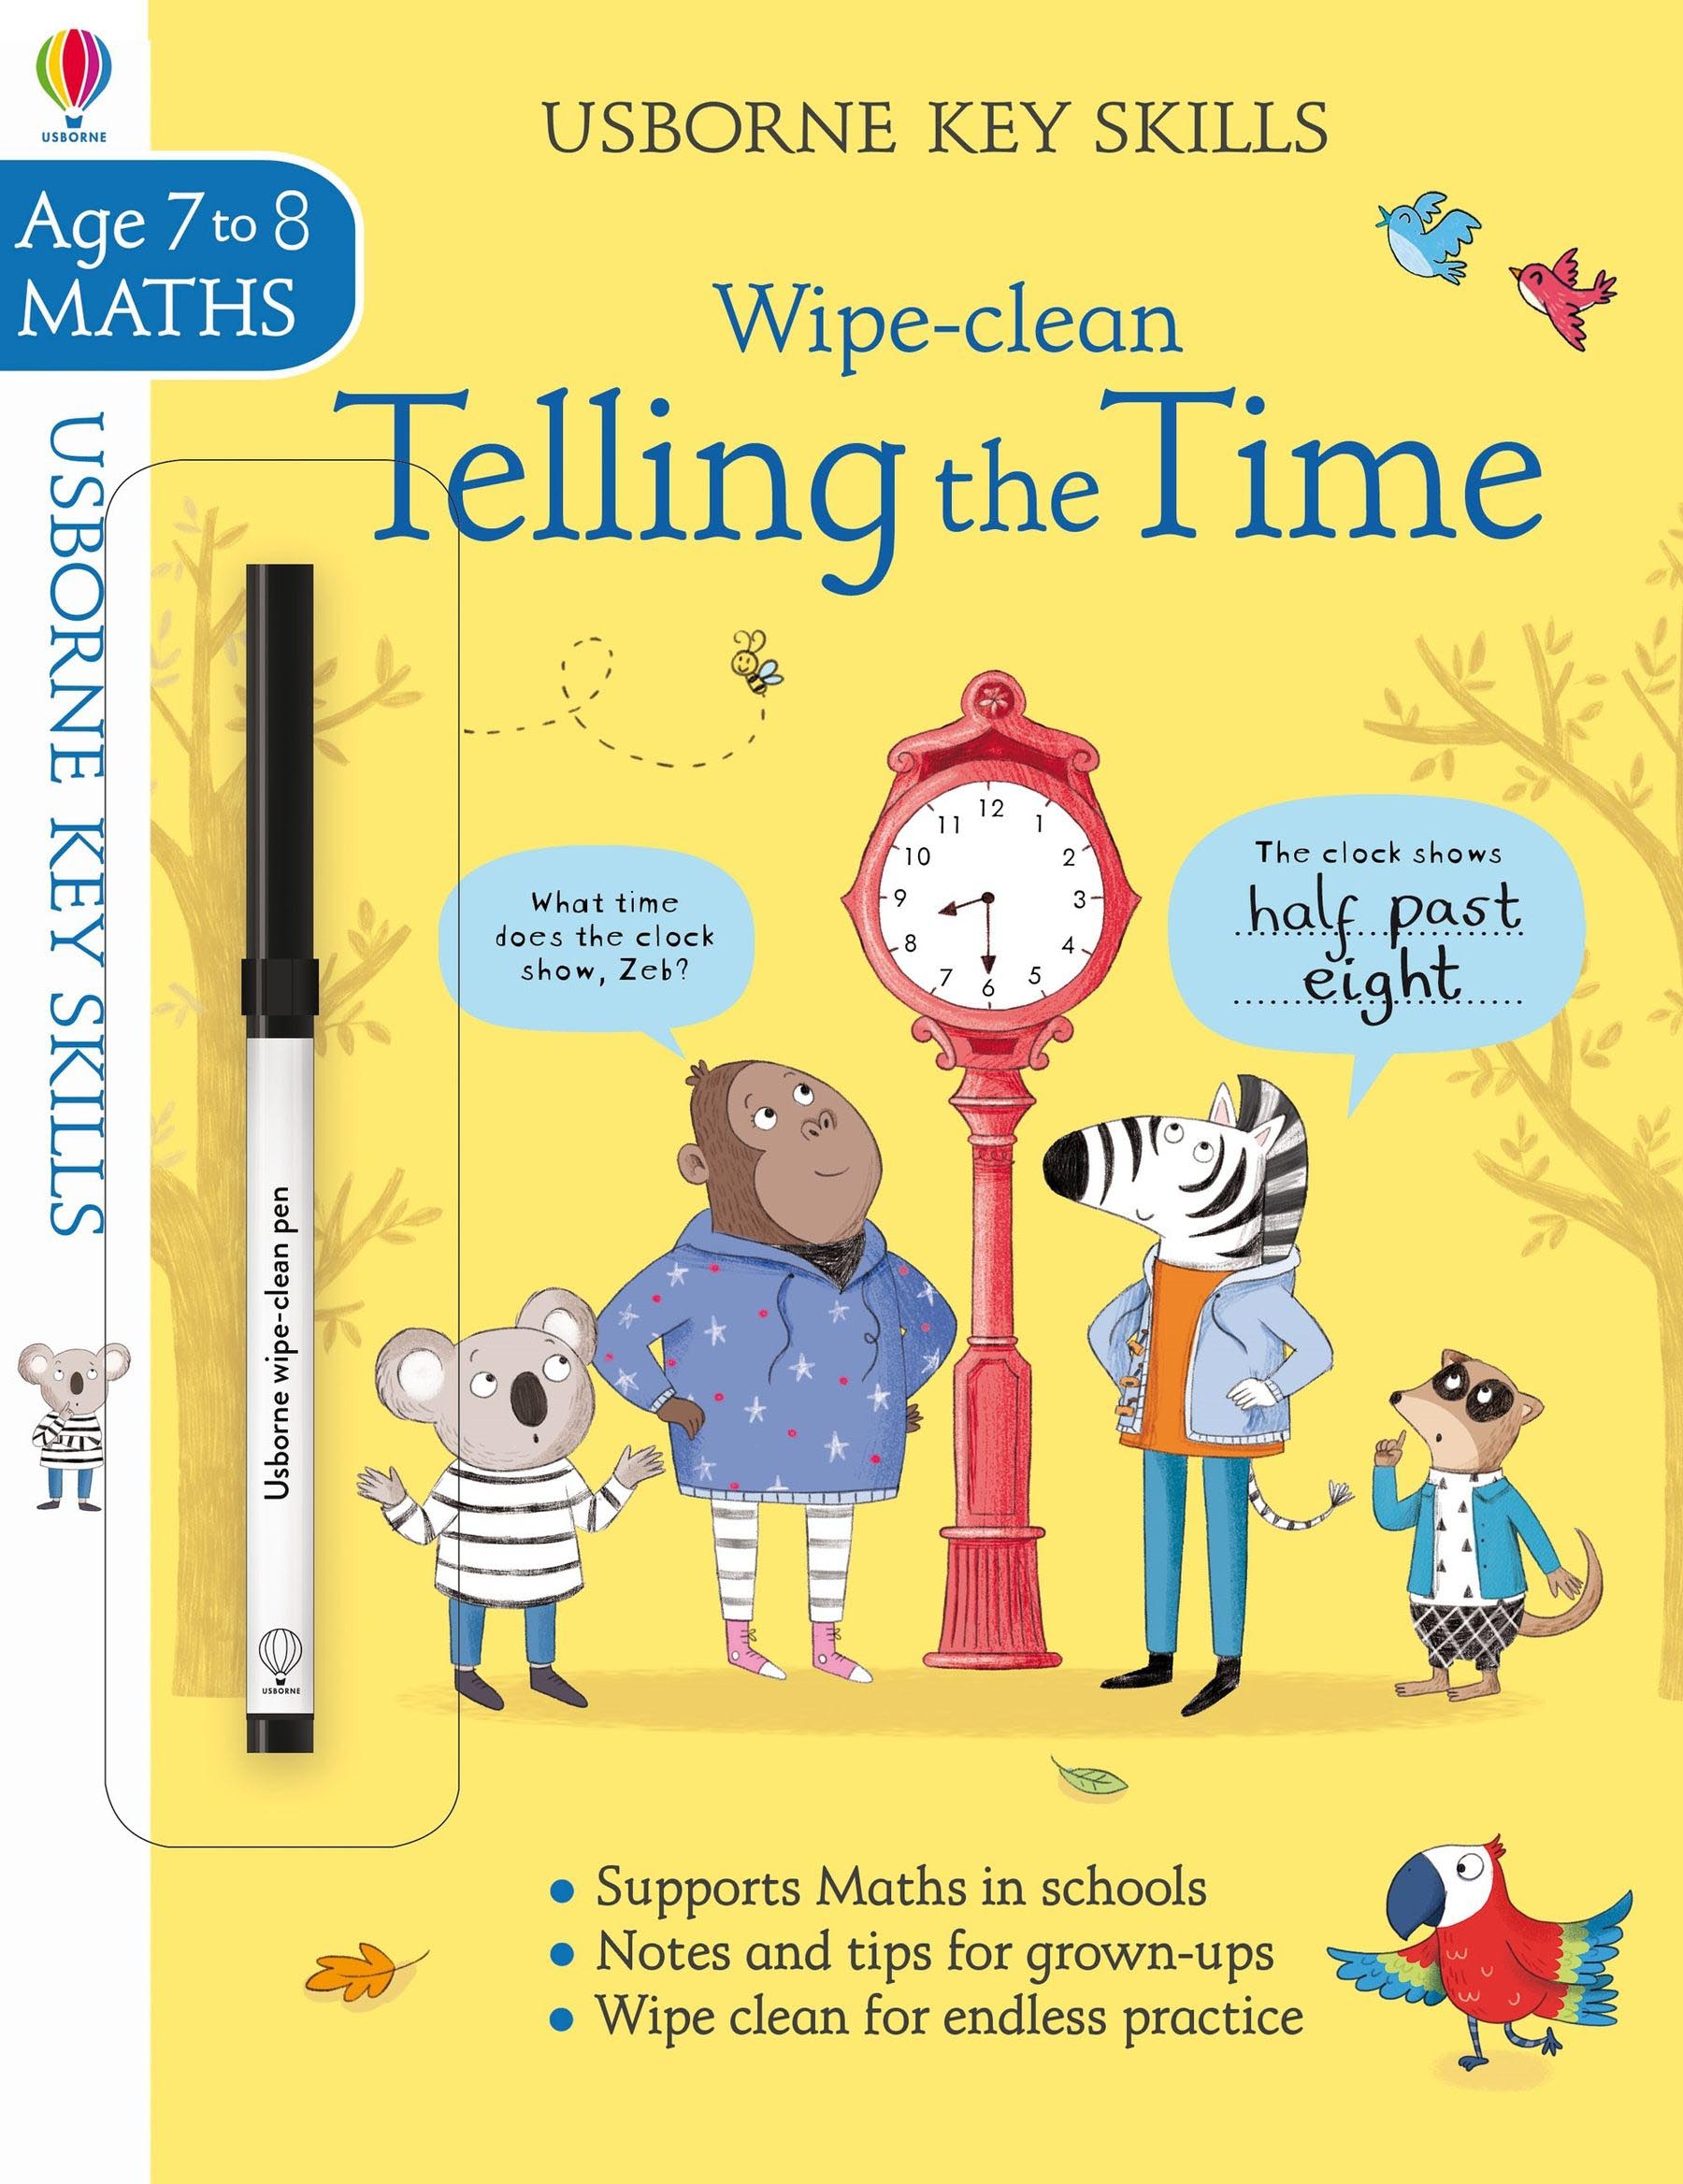 Usborne Key Skills Wipe Clean Telling the Time (Age 7 to 8 Maths)